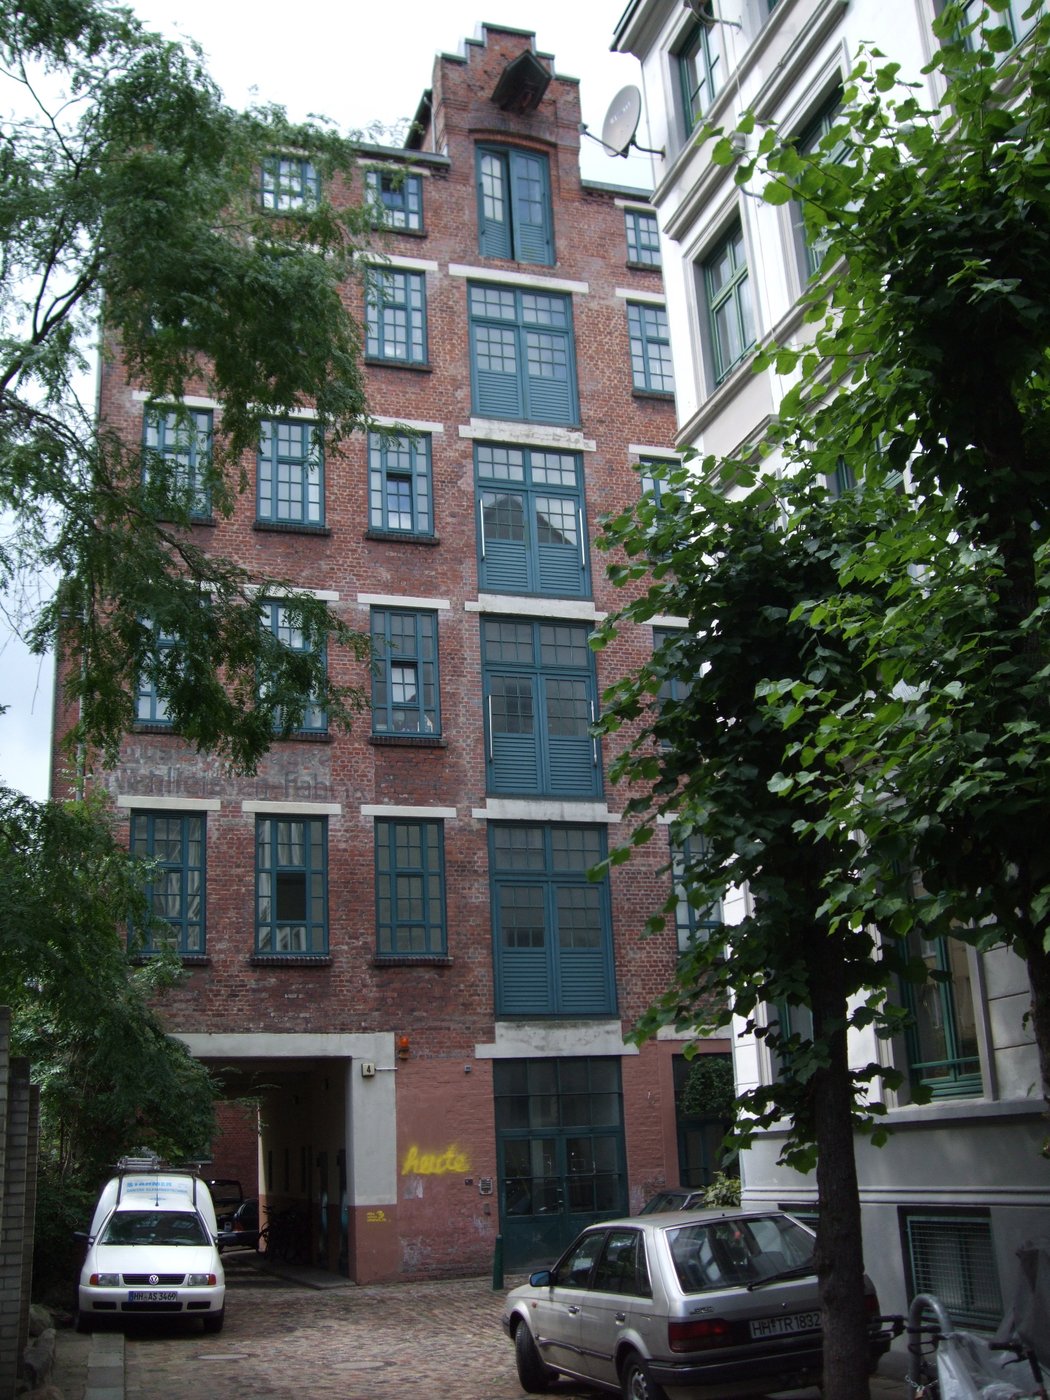 View of brick building